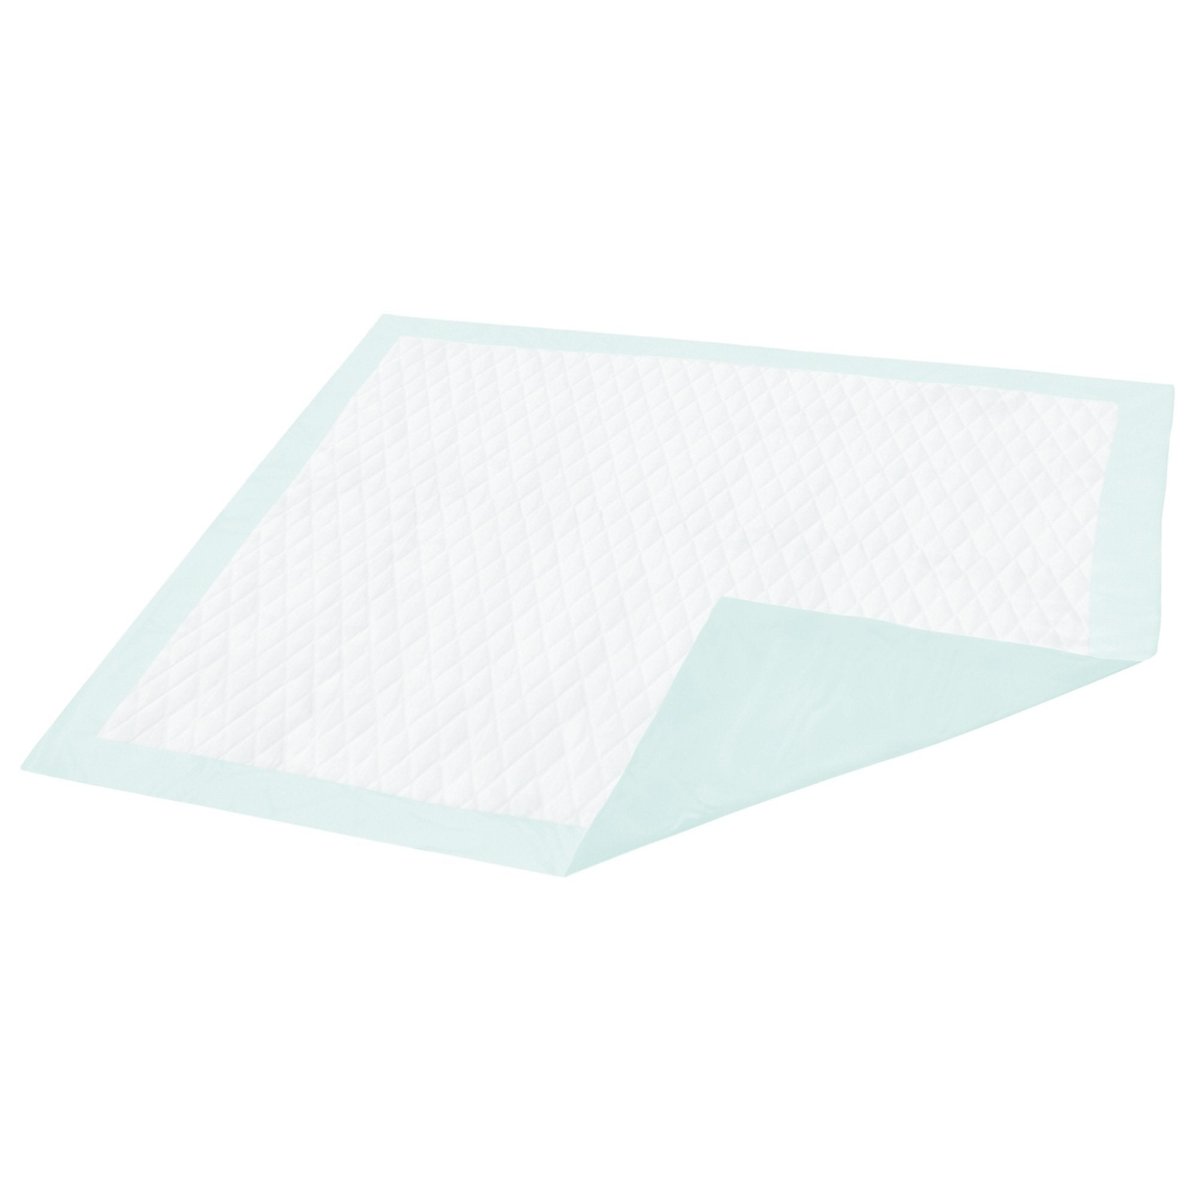 Underpad Dignity 23 X 36 Inch Disposable Fluff / Polymer Light Absorbency - 1191631_CS - 1